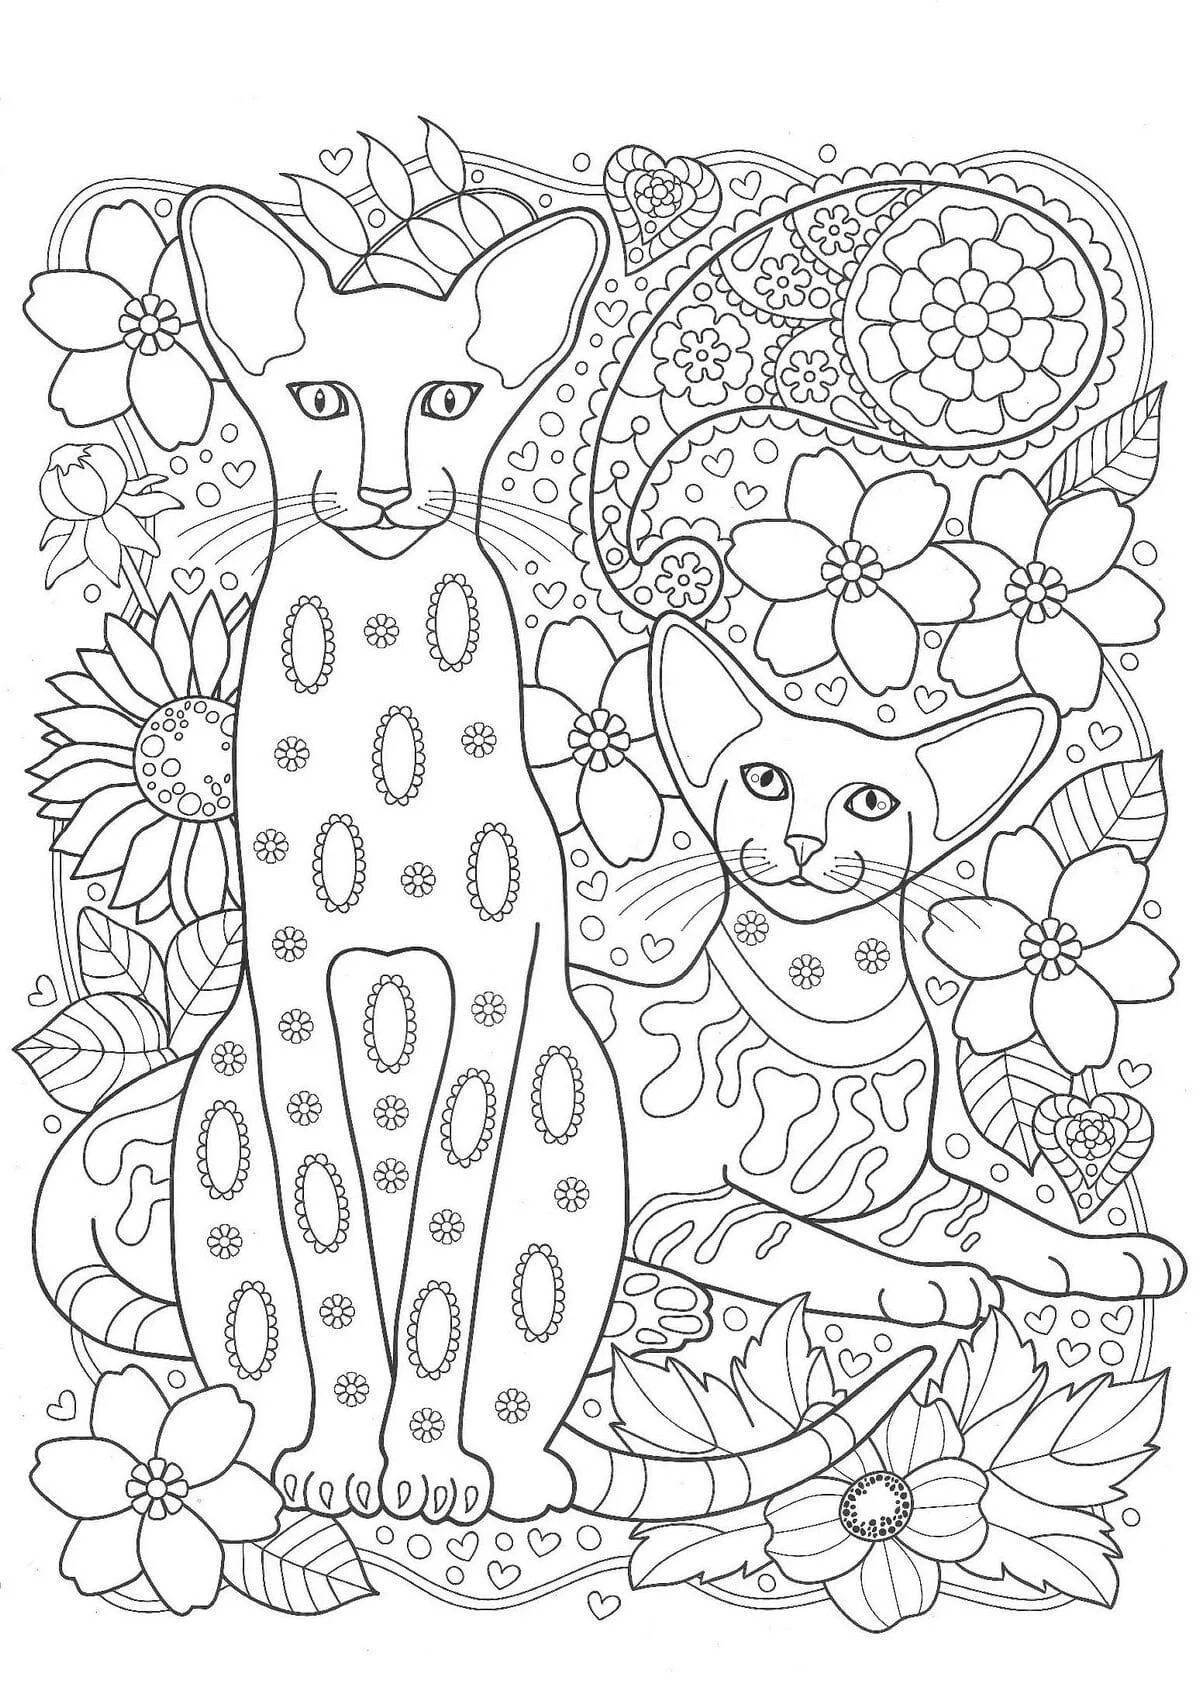 Joyful relaxation coloring book for kids